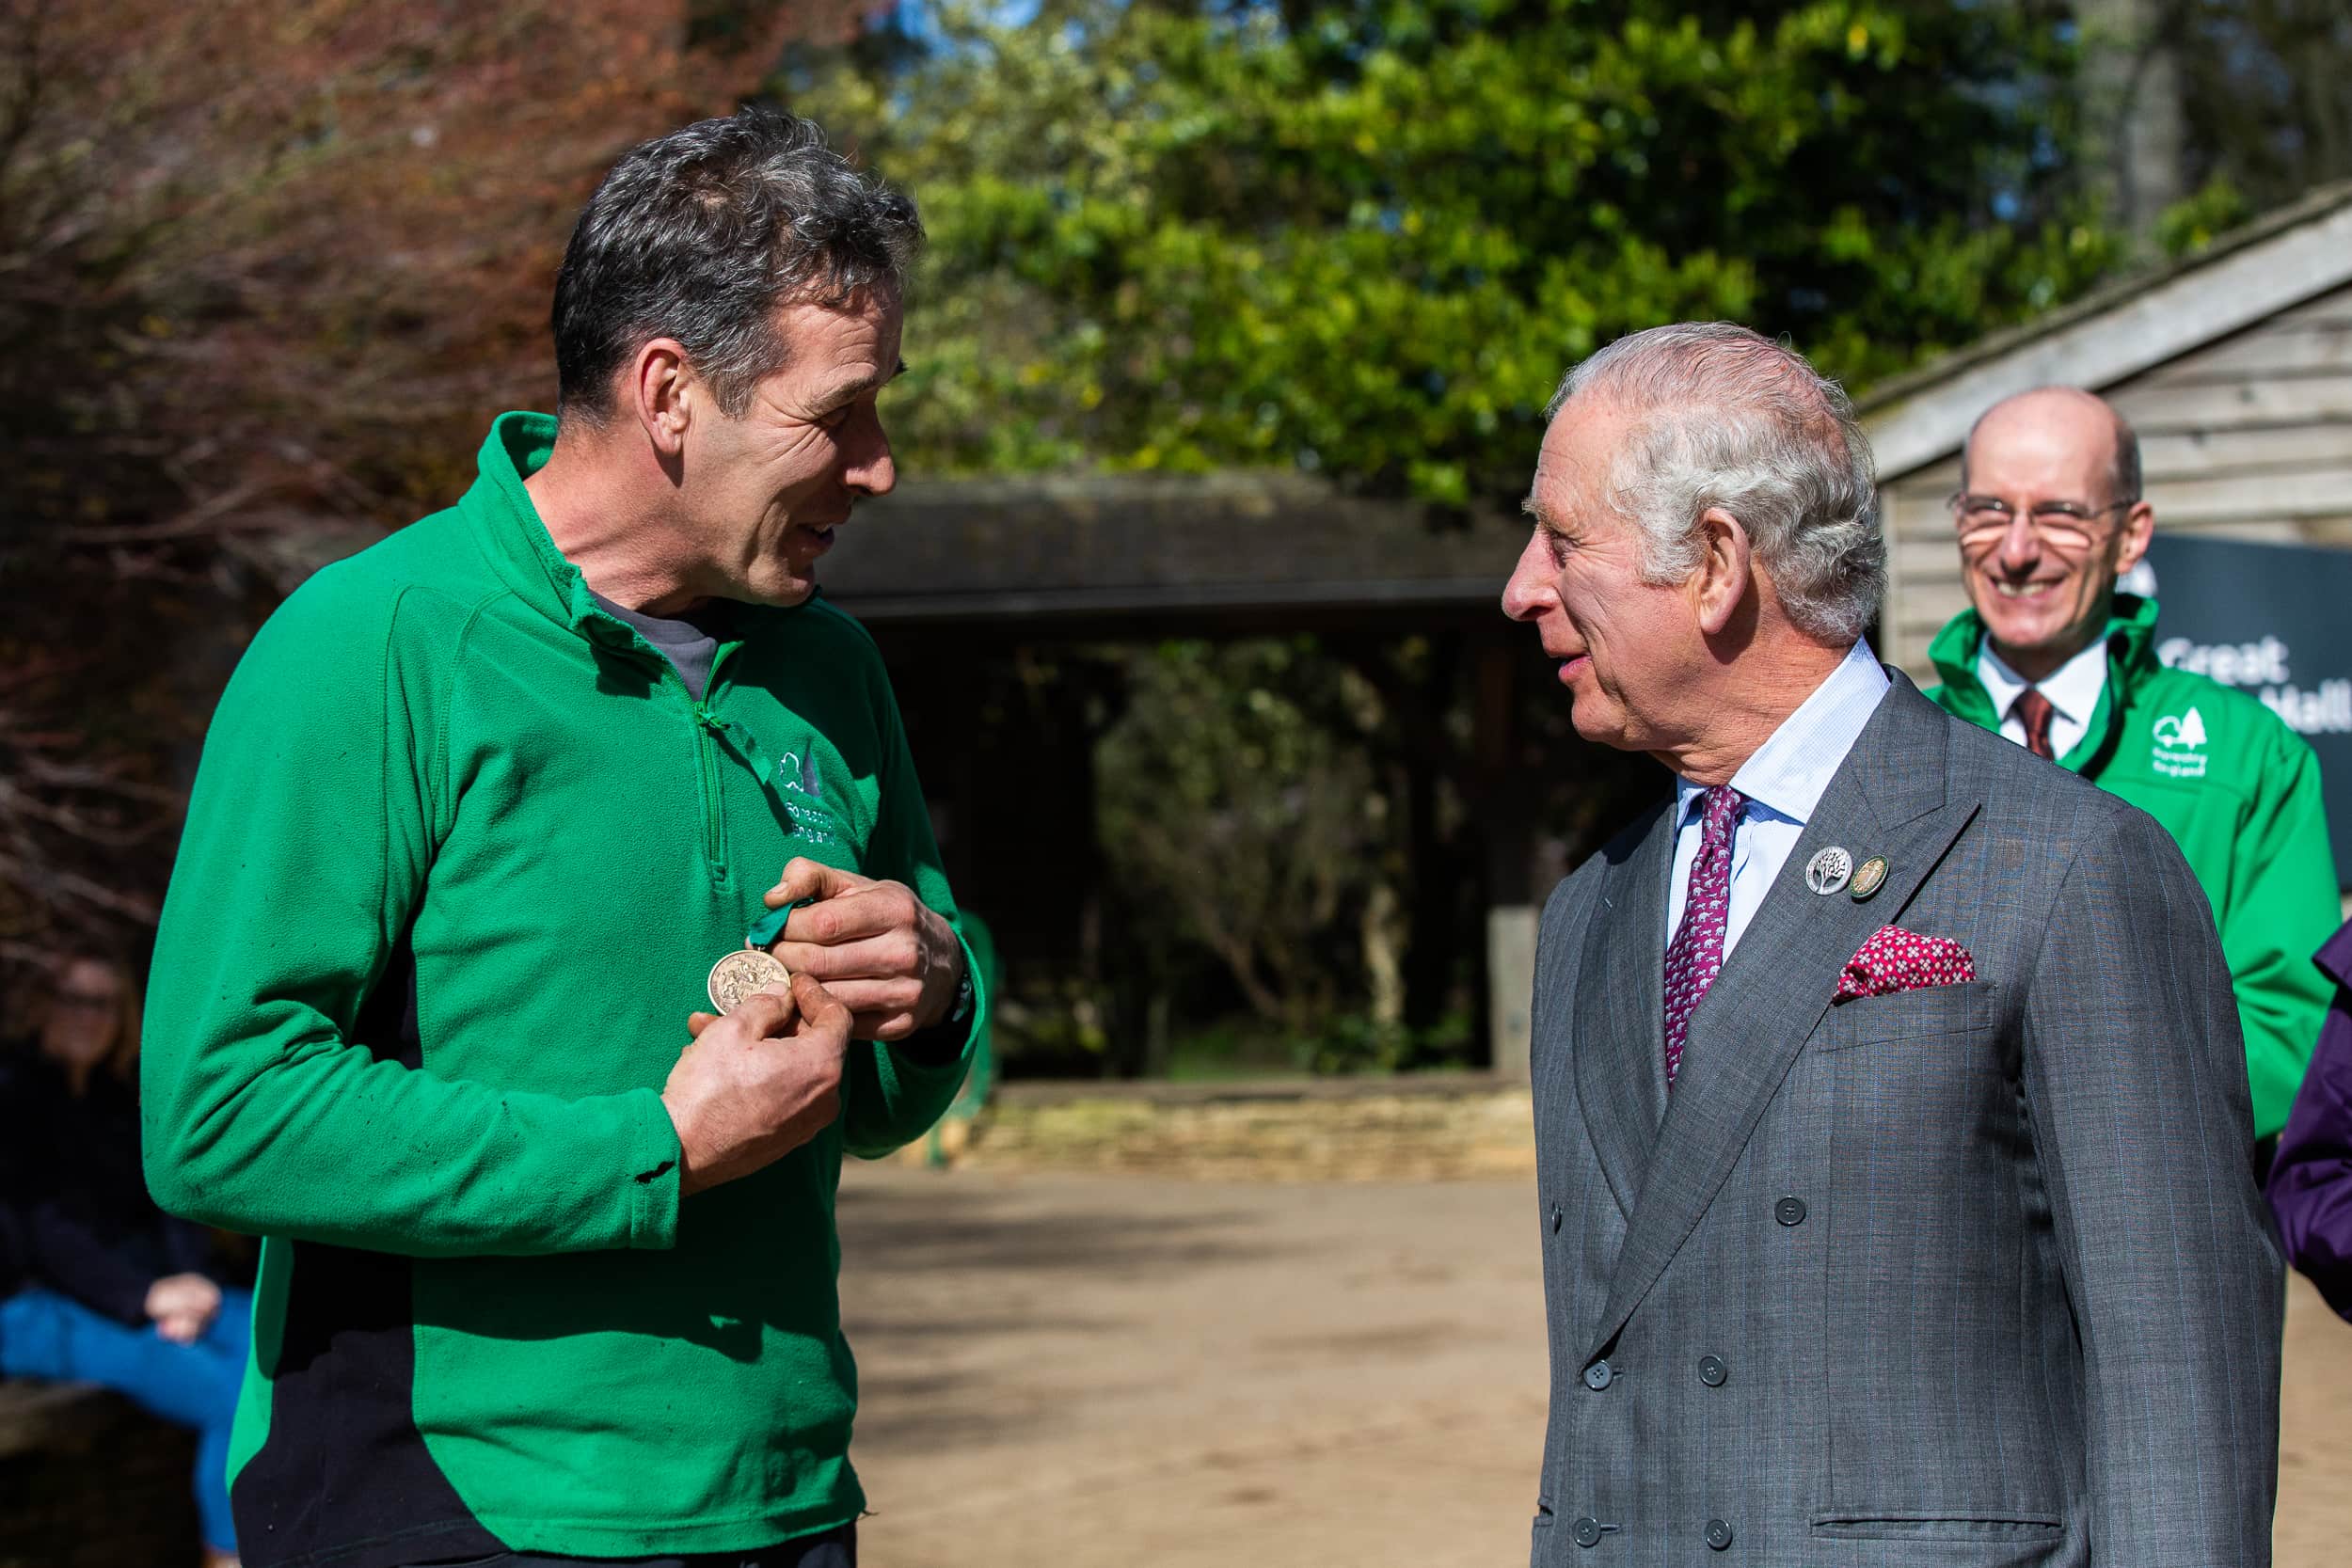 Richard Townsend receives his RFS Long Service Award from the Prince of Wales. Picture Credit: Johnny Hathaway